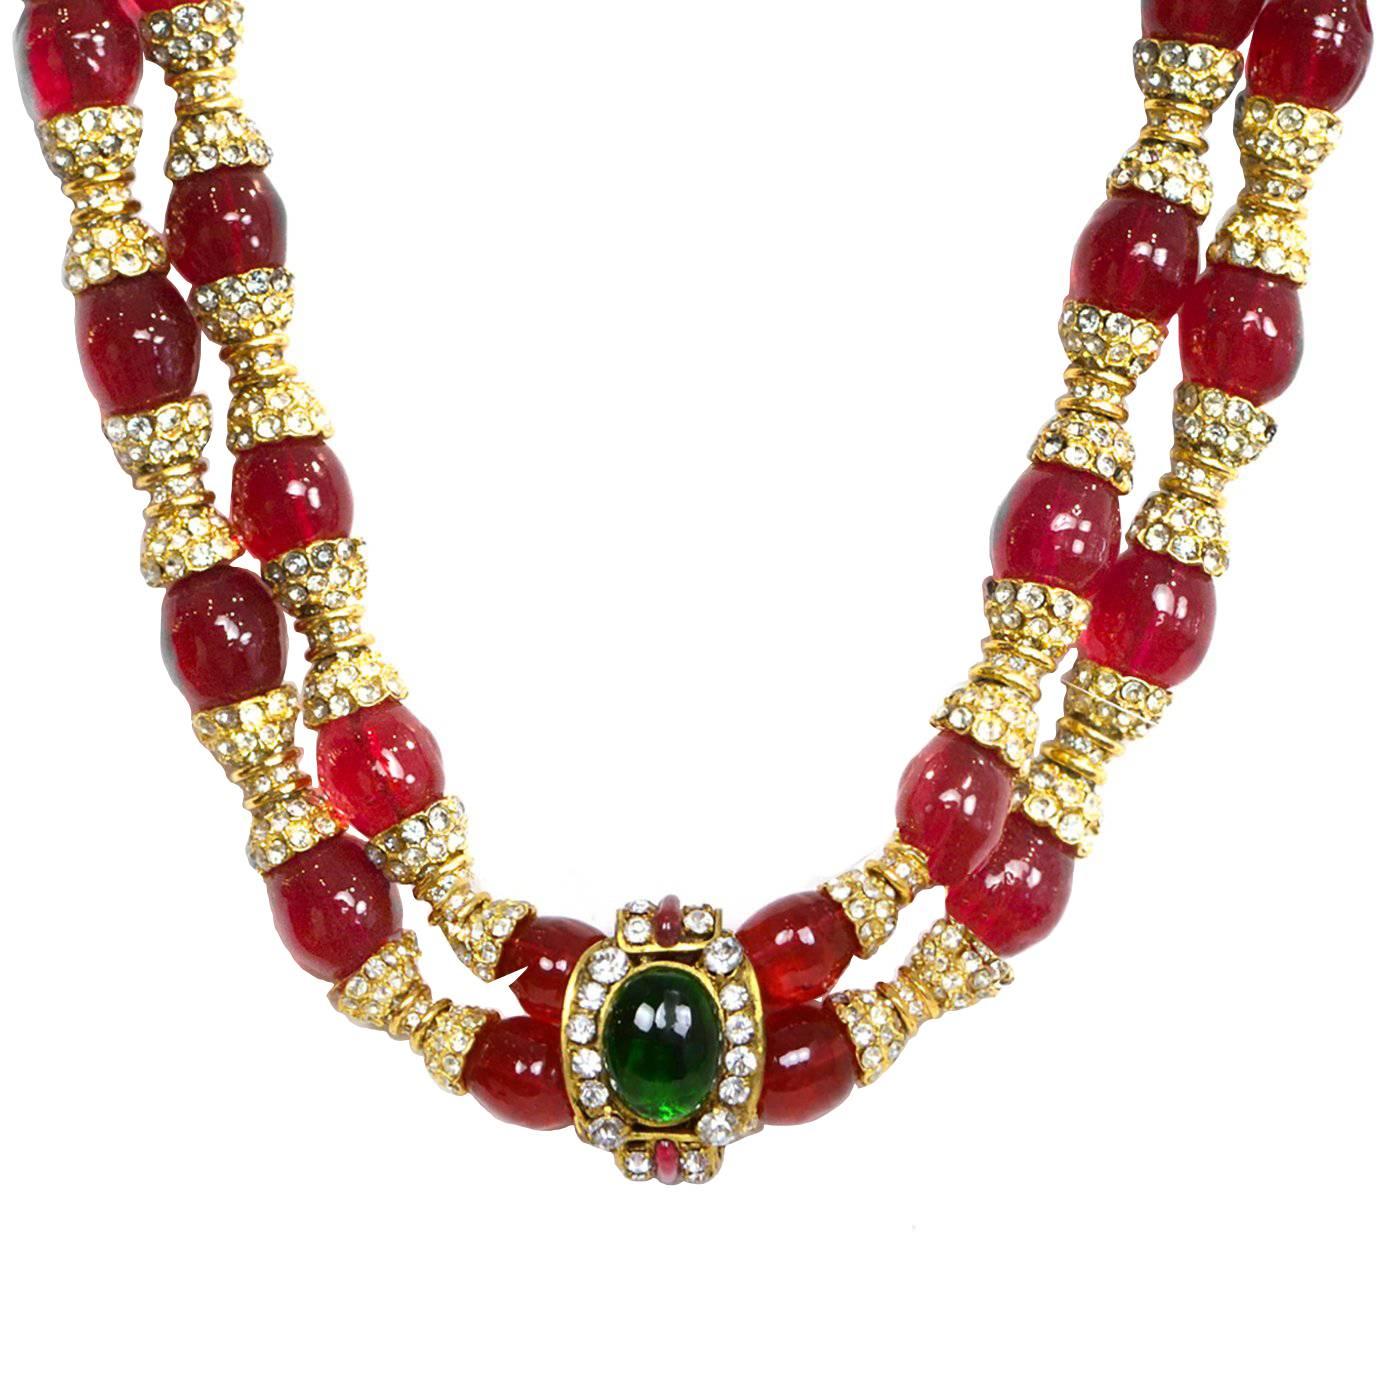 Chanel Vintage '83 Red Gripoix and Rhinestone Double Tier Necklace